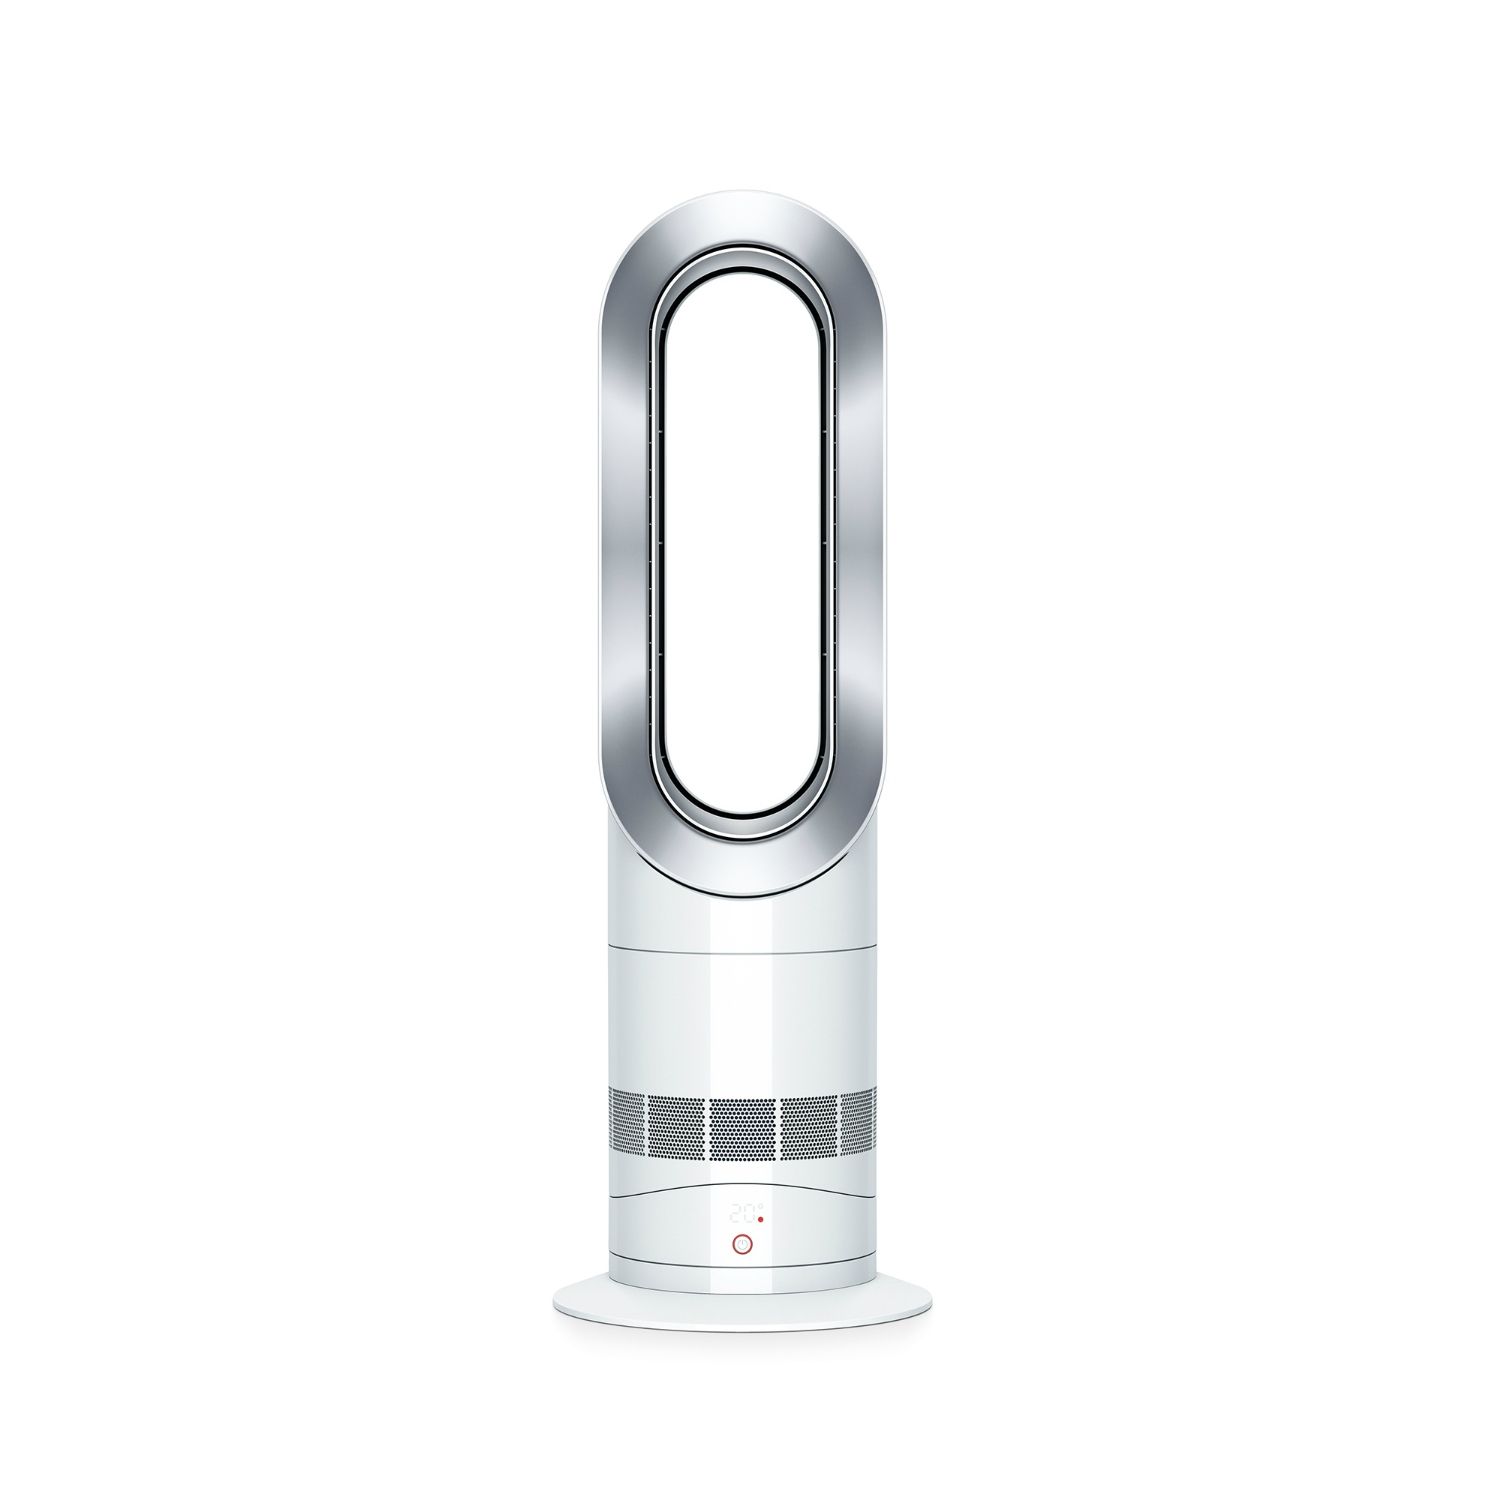 Dyson AM09 Hot and Cold Fan Heater - White and Nickel - 0